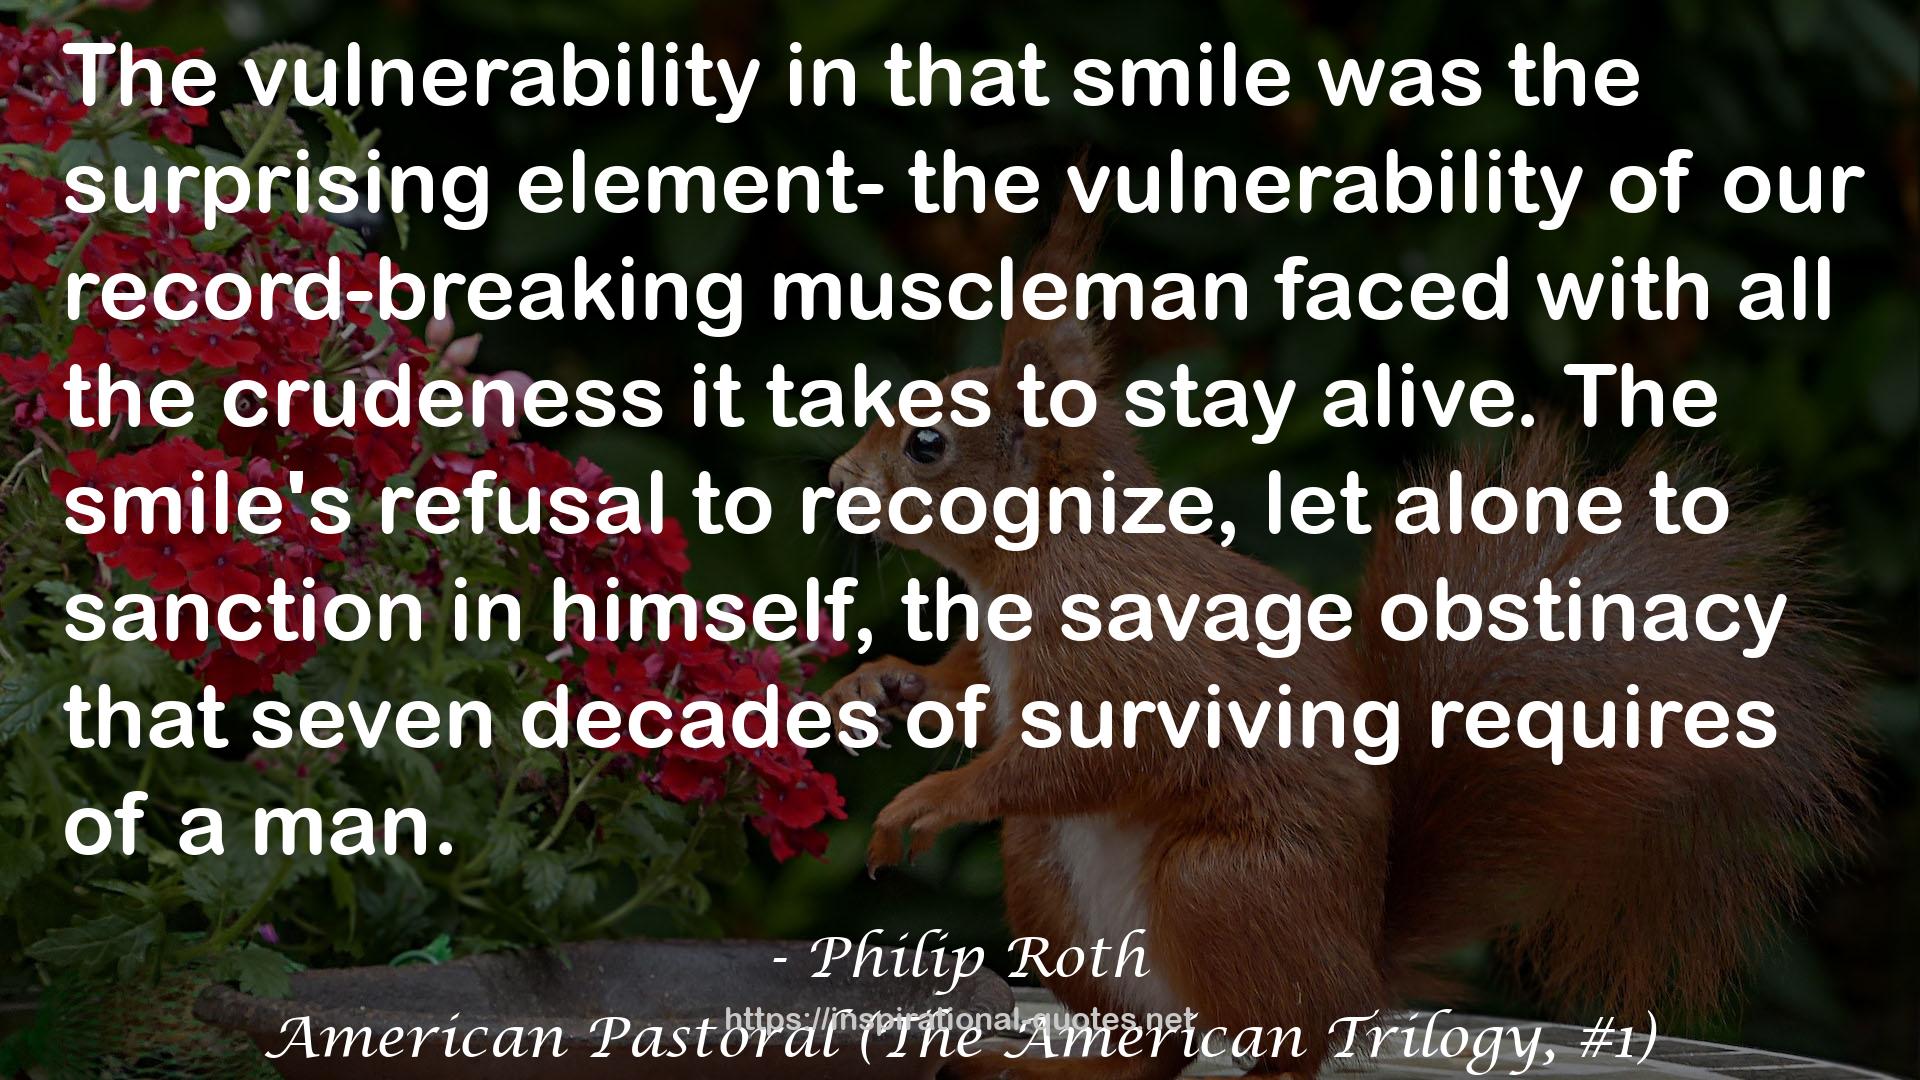 American Pastoral (The American Trilogy, #1) QUOTES